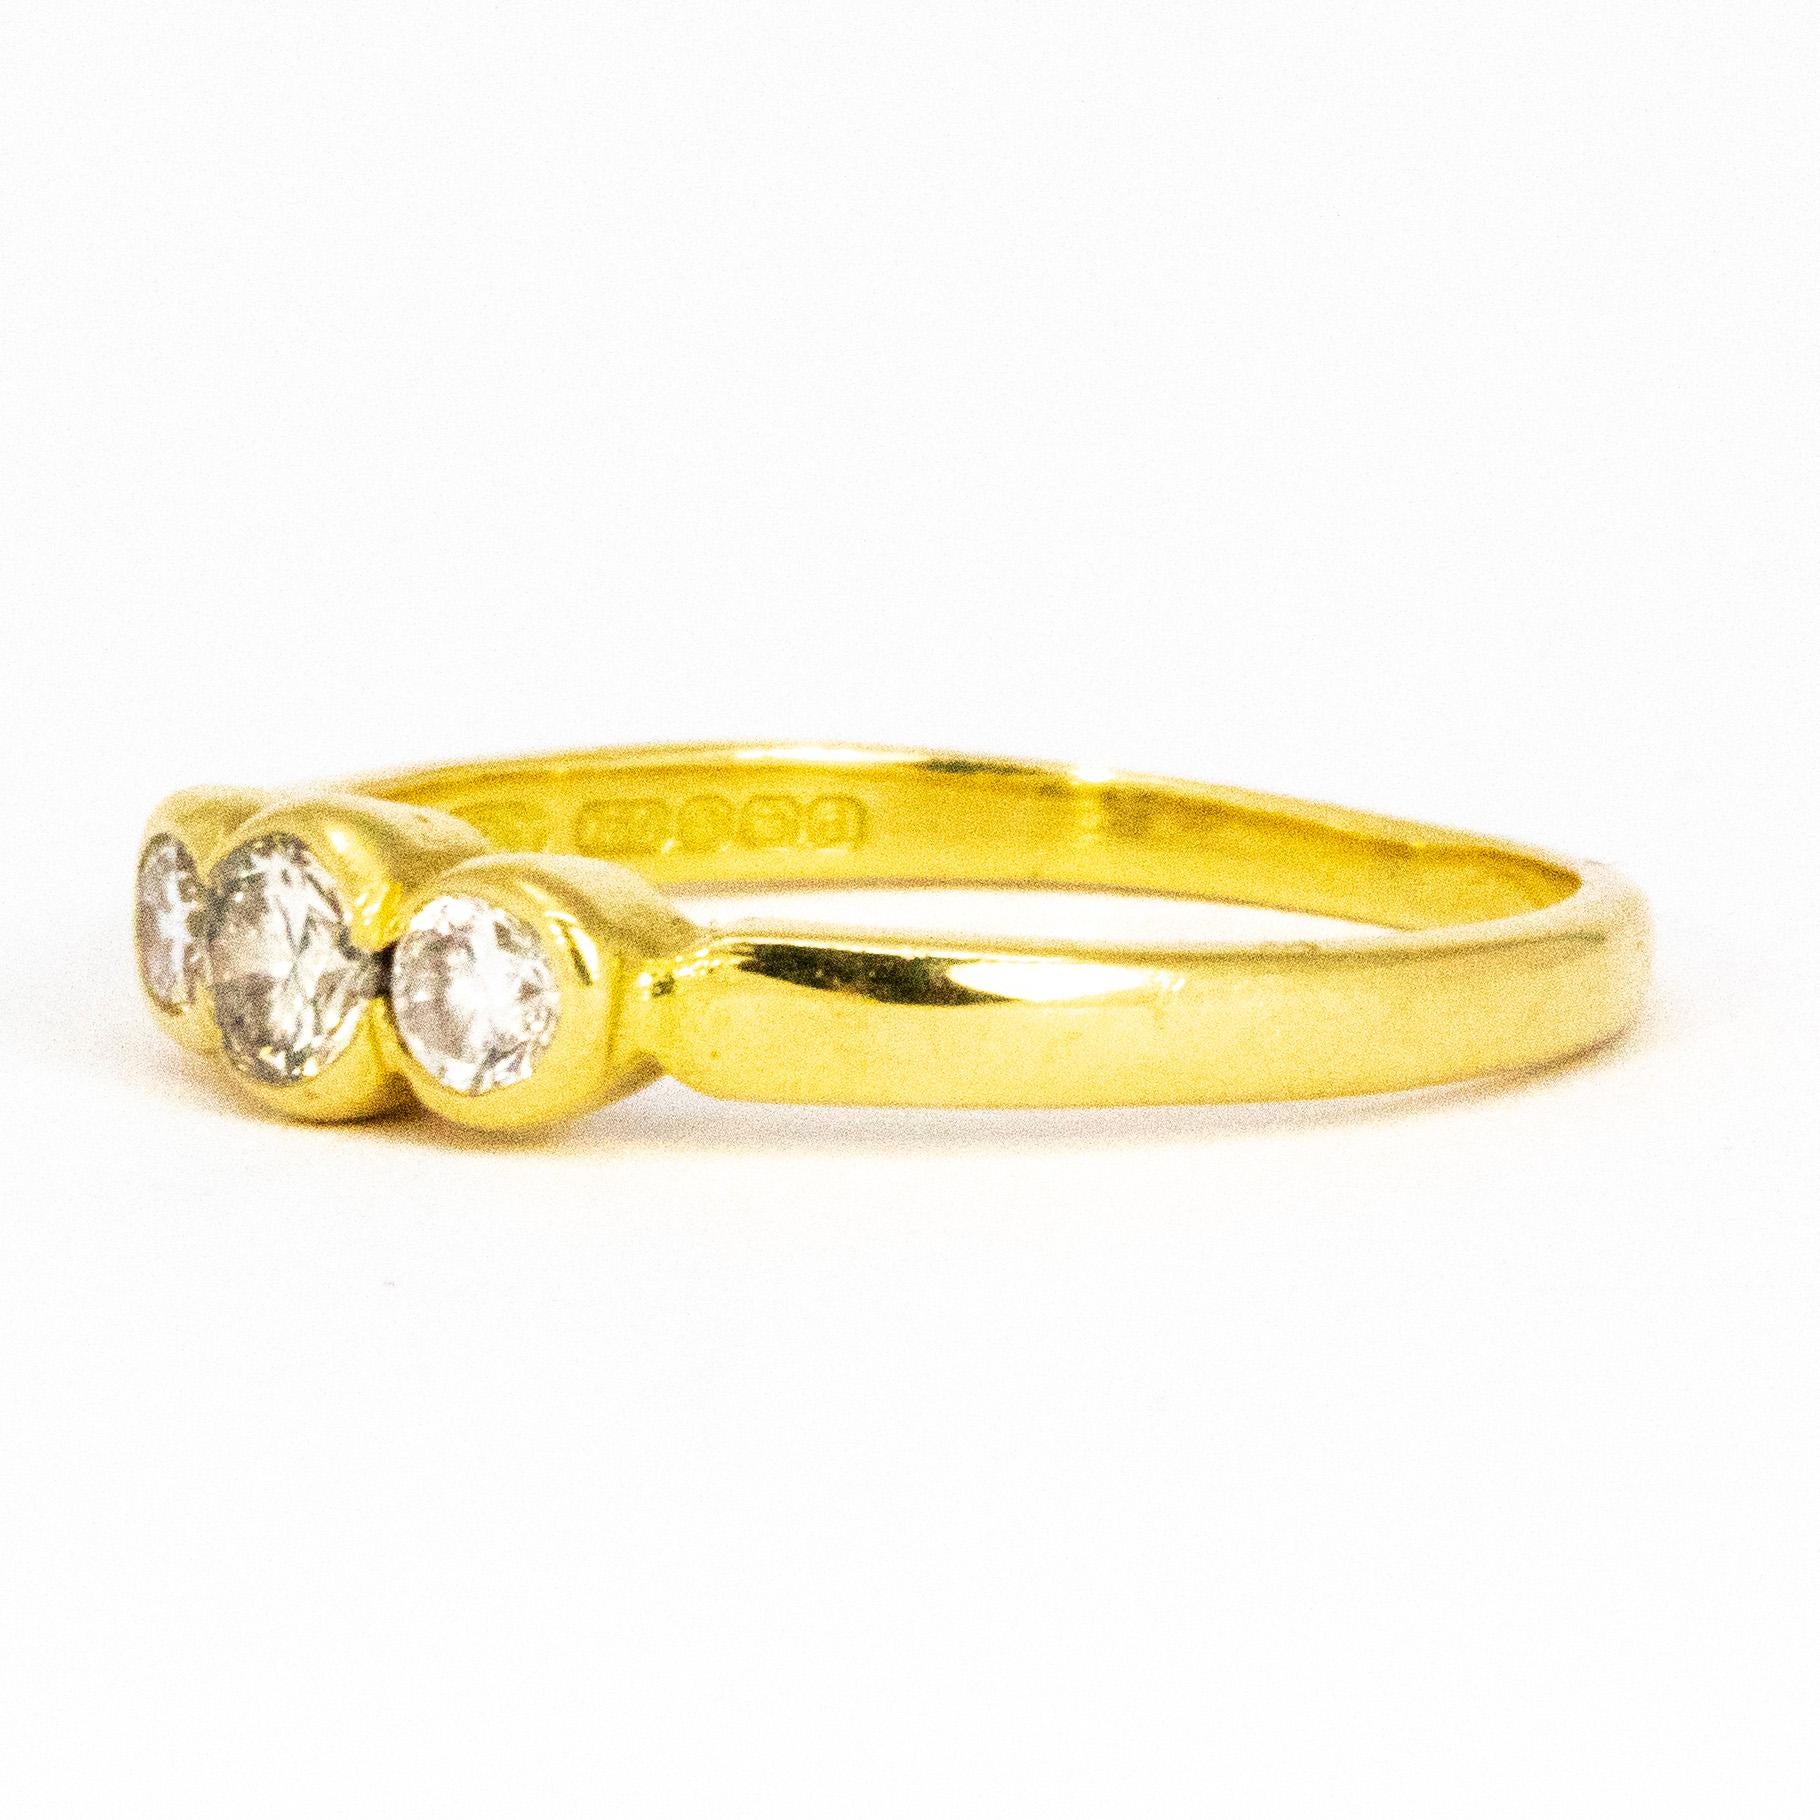 Sitting at the centre of this simple and fluid style gold band are three diamonds measuring 20pts at the centre and 10pts either side. The diamonds are brilliant cut and have a wonderful bright sparkle. 

Ring Size: N or 6 3/4